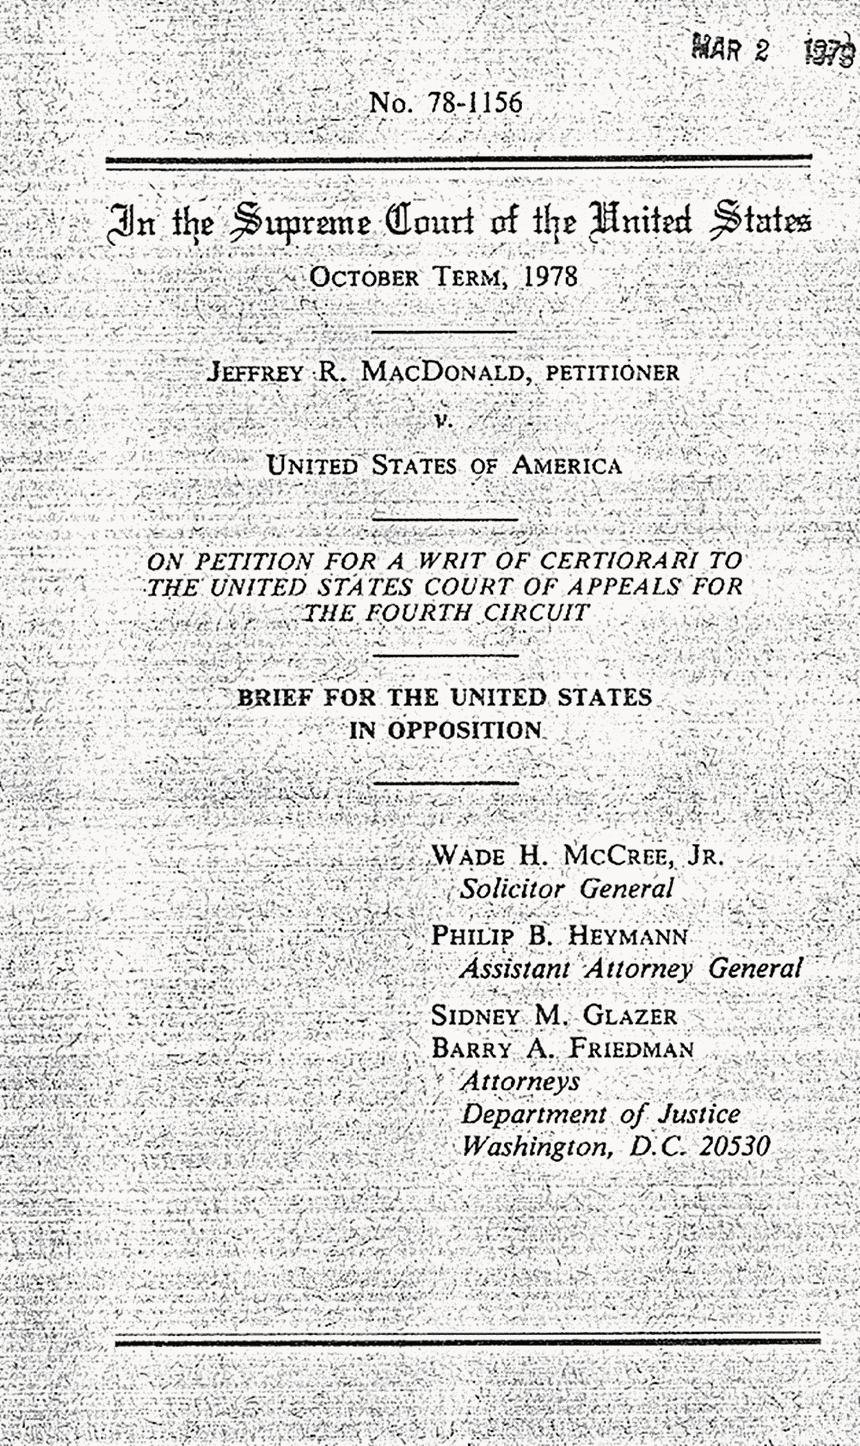 February 1979: Supreme Court of the United States, On Petition for Writ of Certiorari to the U. S. Court of Appeals for the 4th Circuit: Brief for the United States in Opposition, cover page